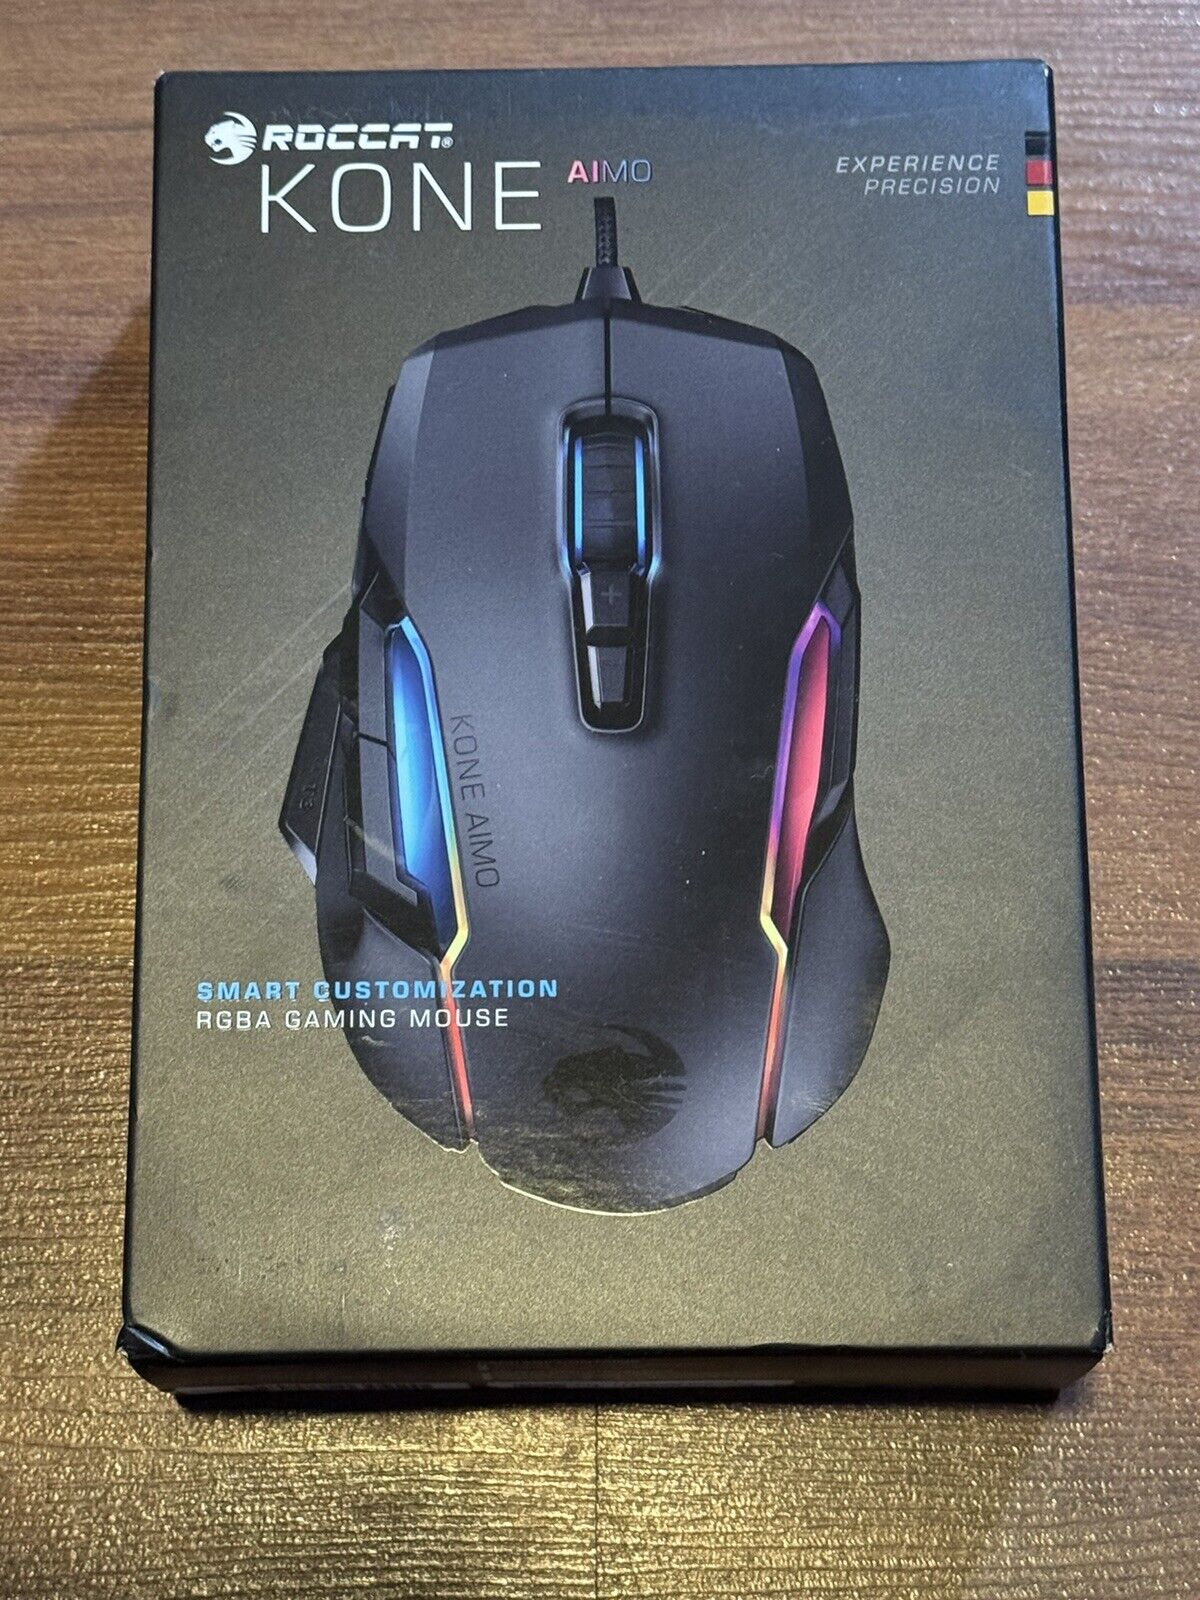 ROCCAT Kone AIMO (ROC11820BK) Wired Gaming Mouse